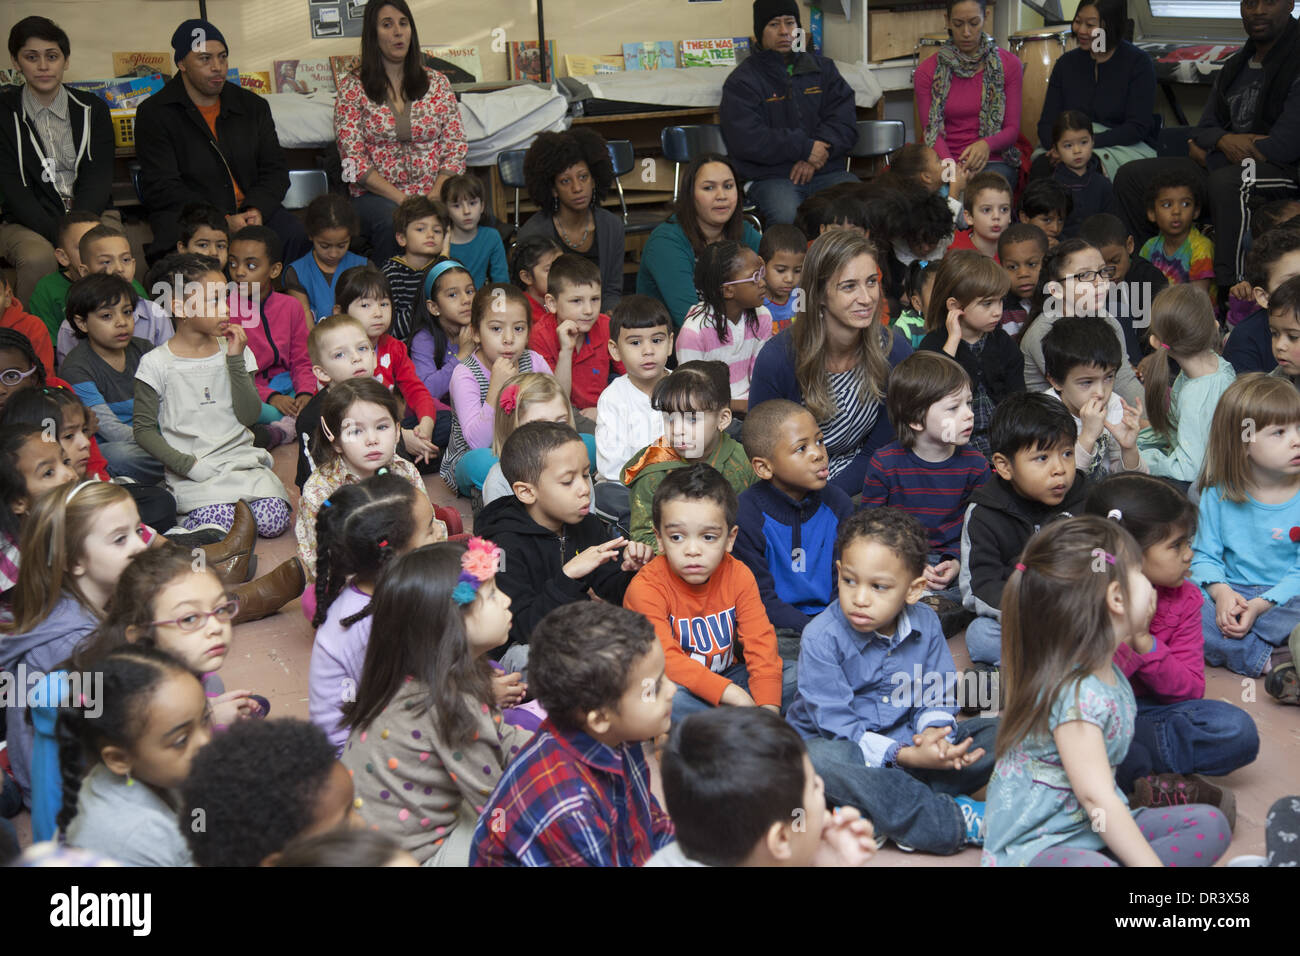 Children, teachers & parents sing together every Monday morning at the Castle Bridge Public Elementary School, Manhattan, NYC Stock Photo